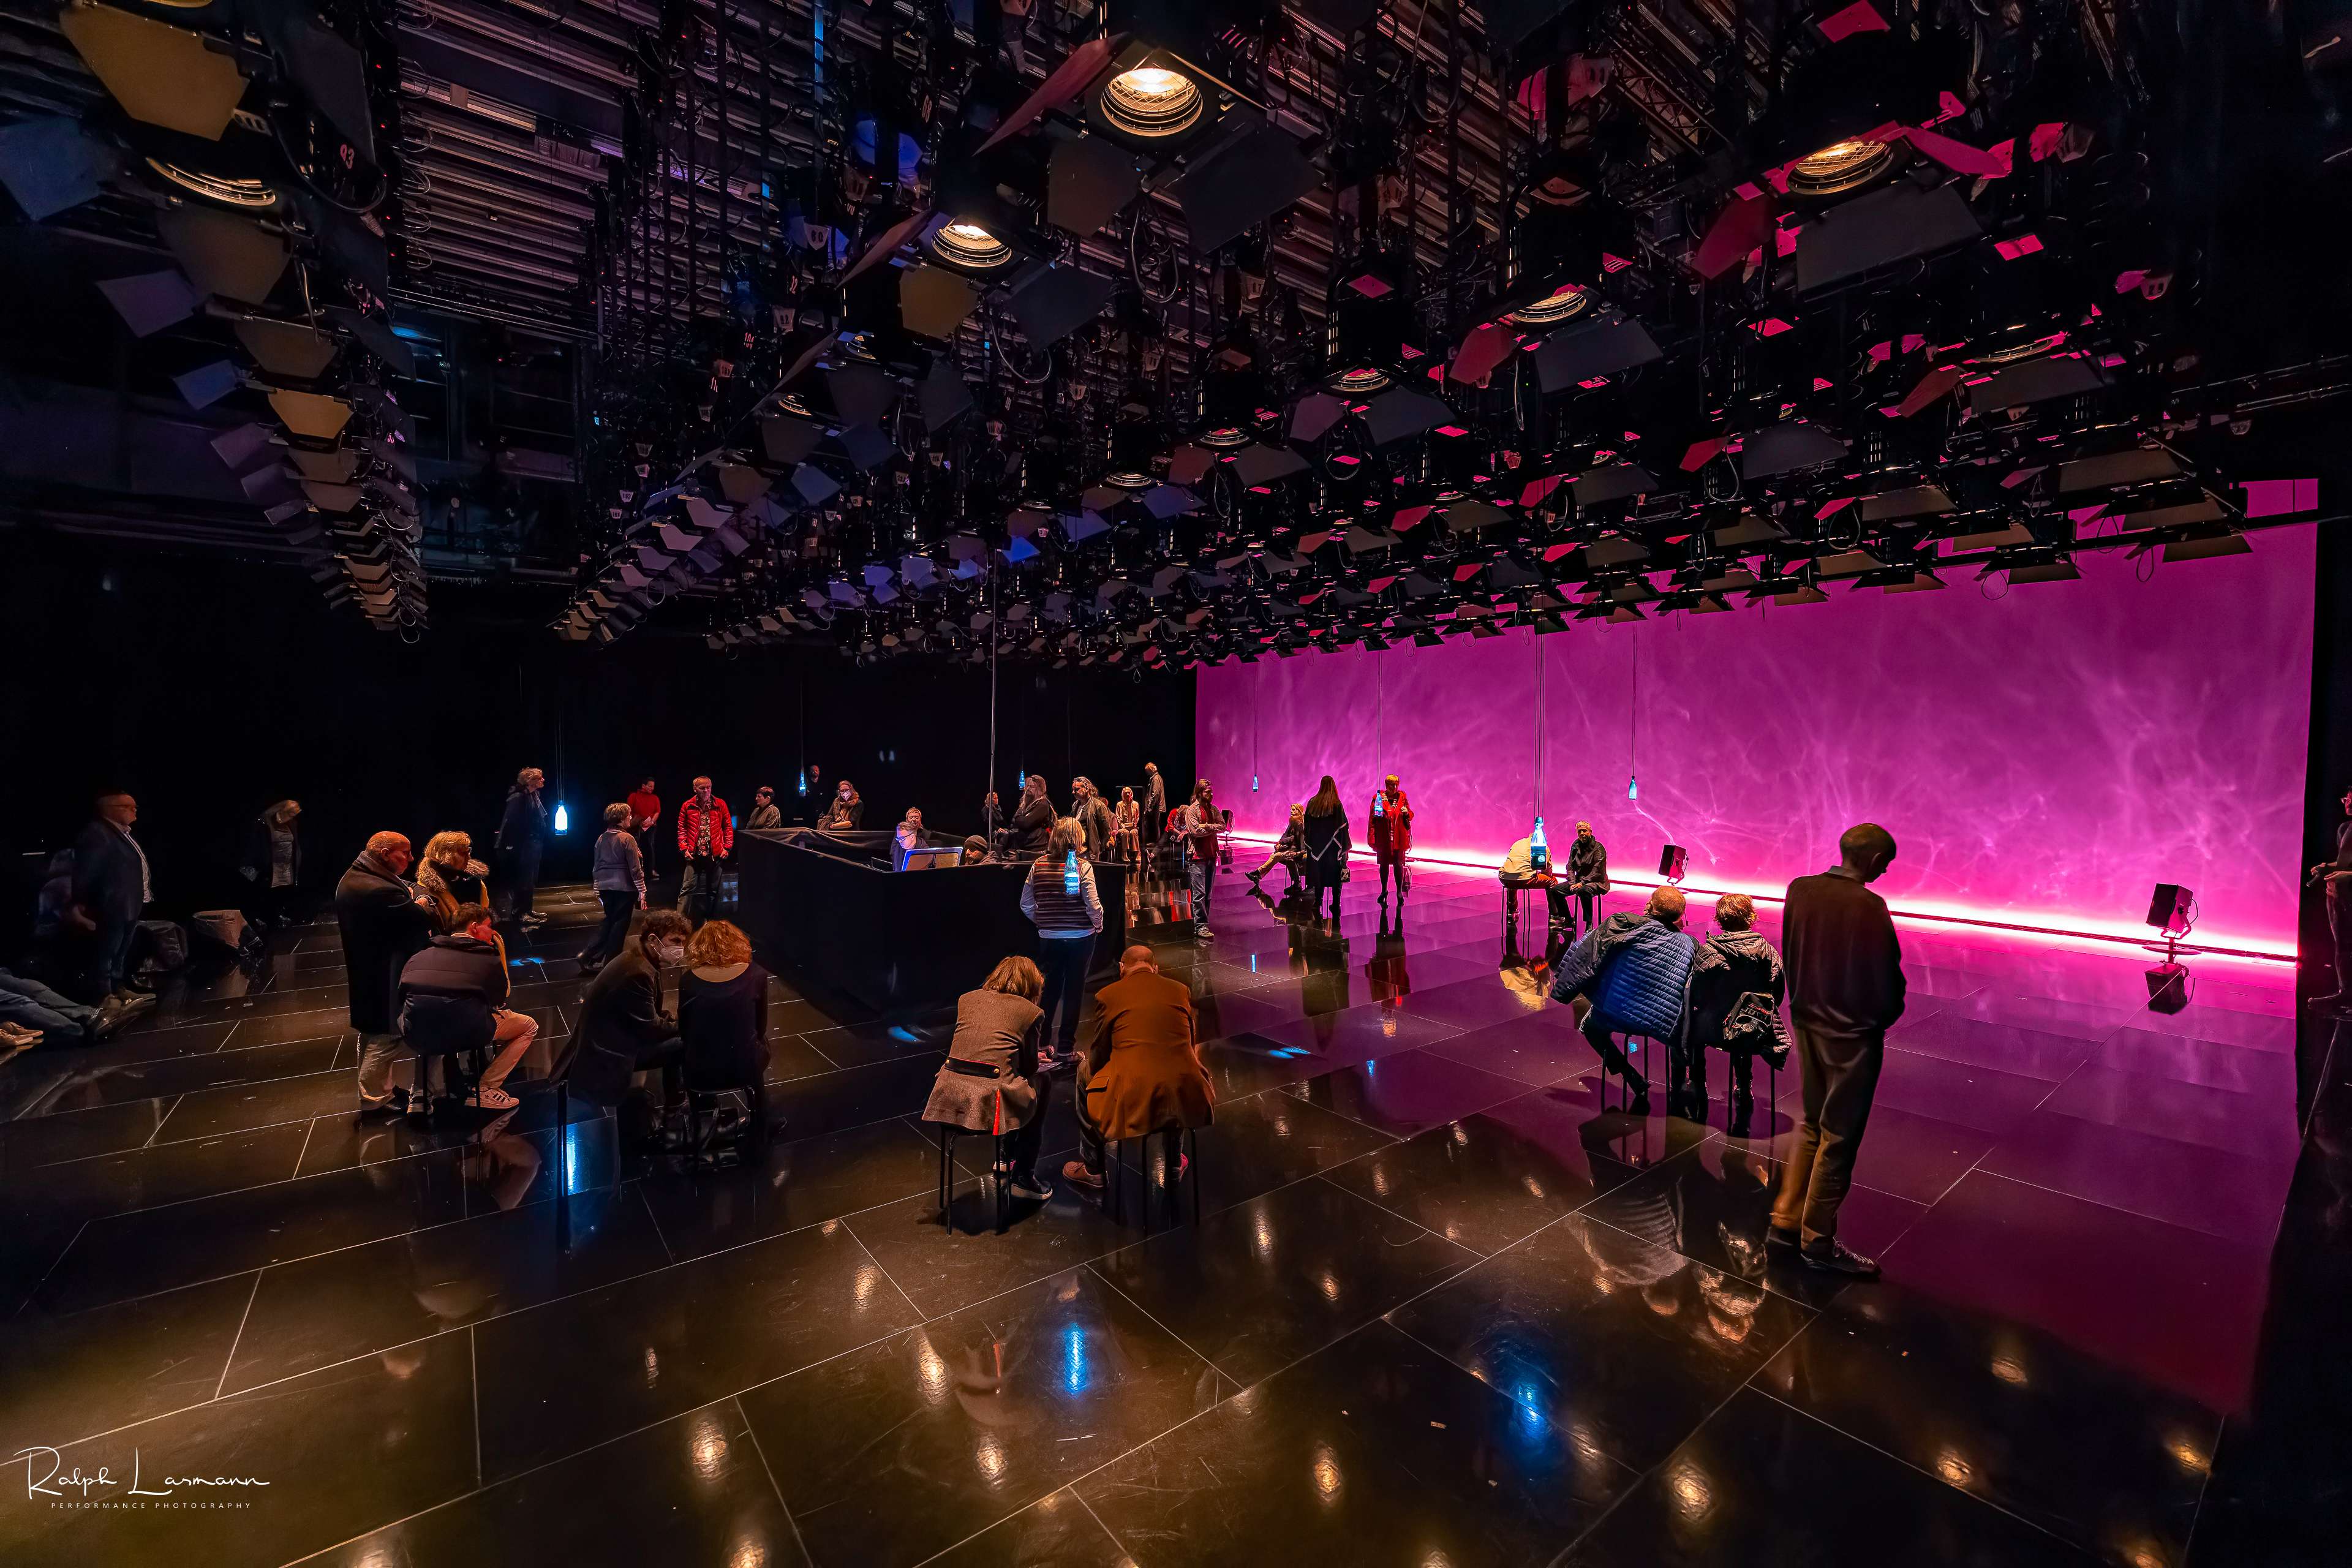 Moving freely in the orchestral sound body thanks to an innovative 3D audio installation:   Ensemble Modern’s “walk-in sound body” at the "cresc" festival.